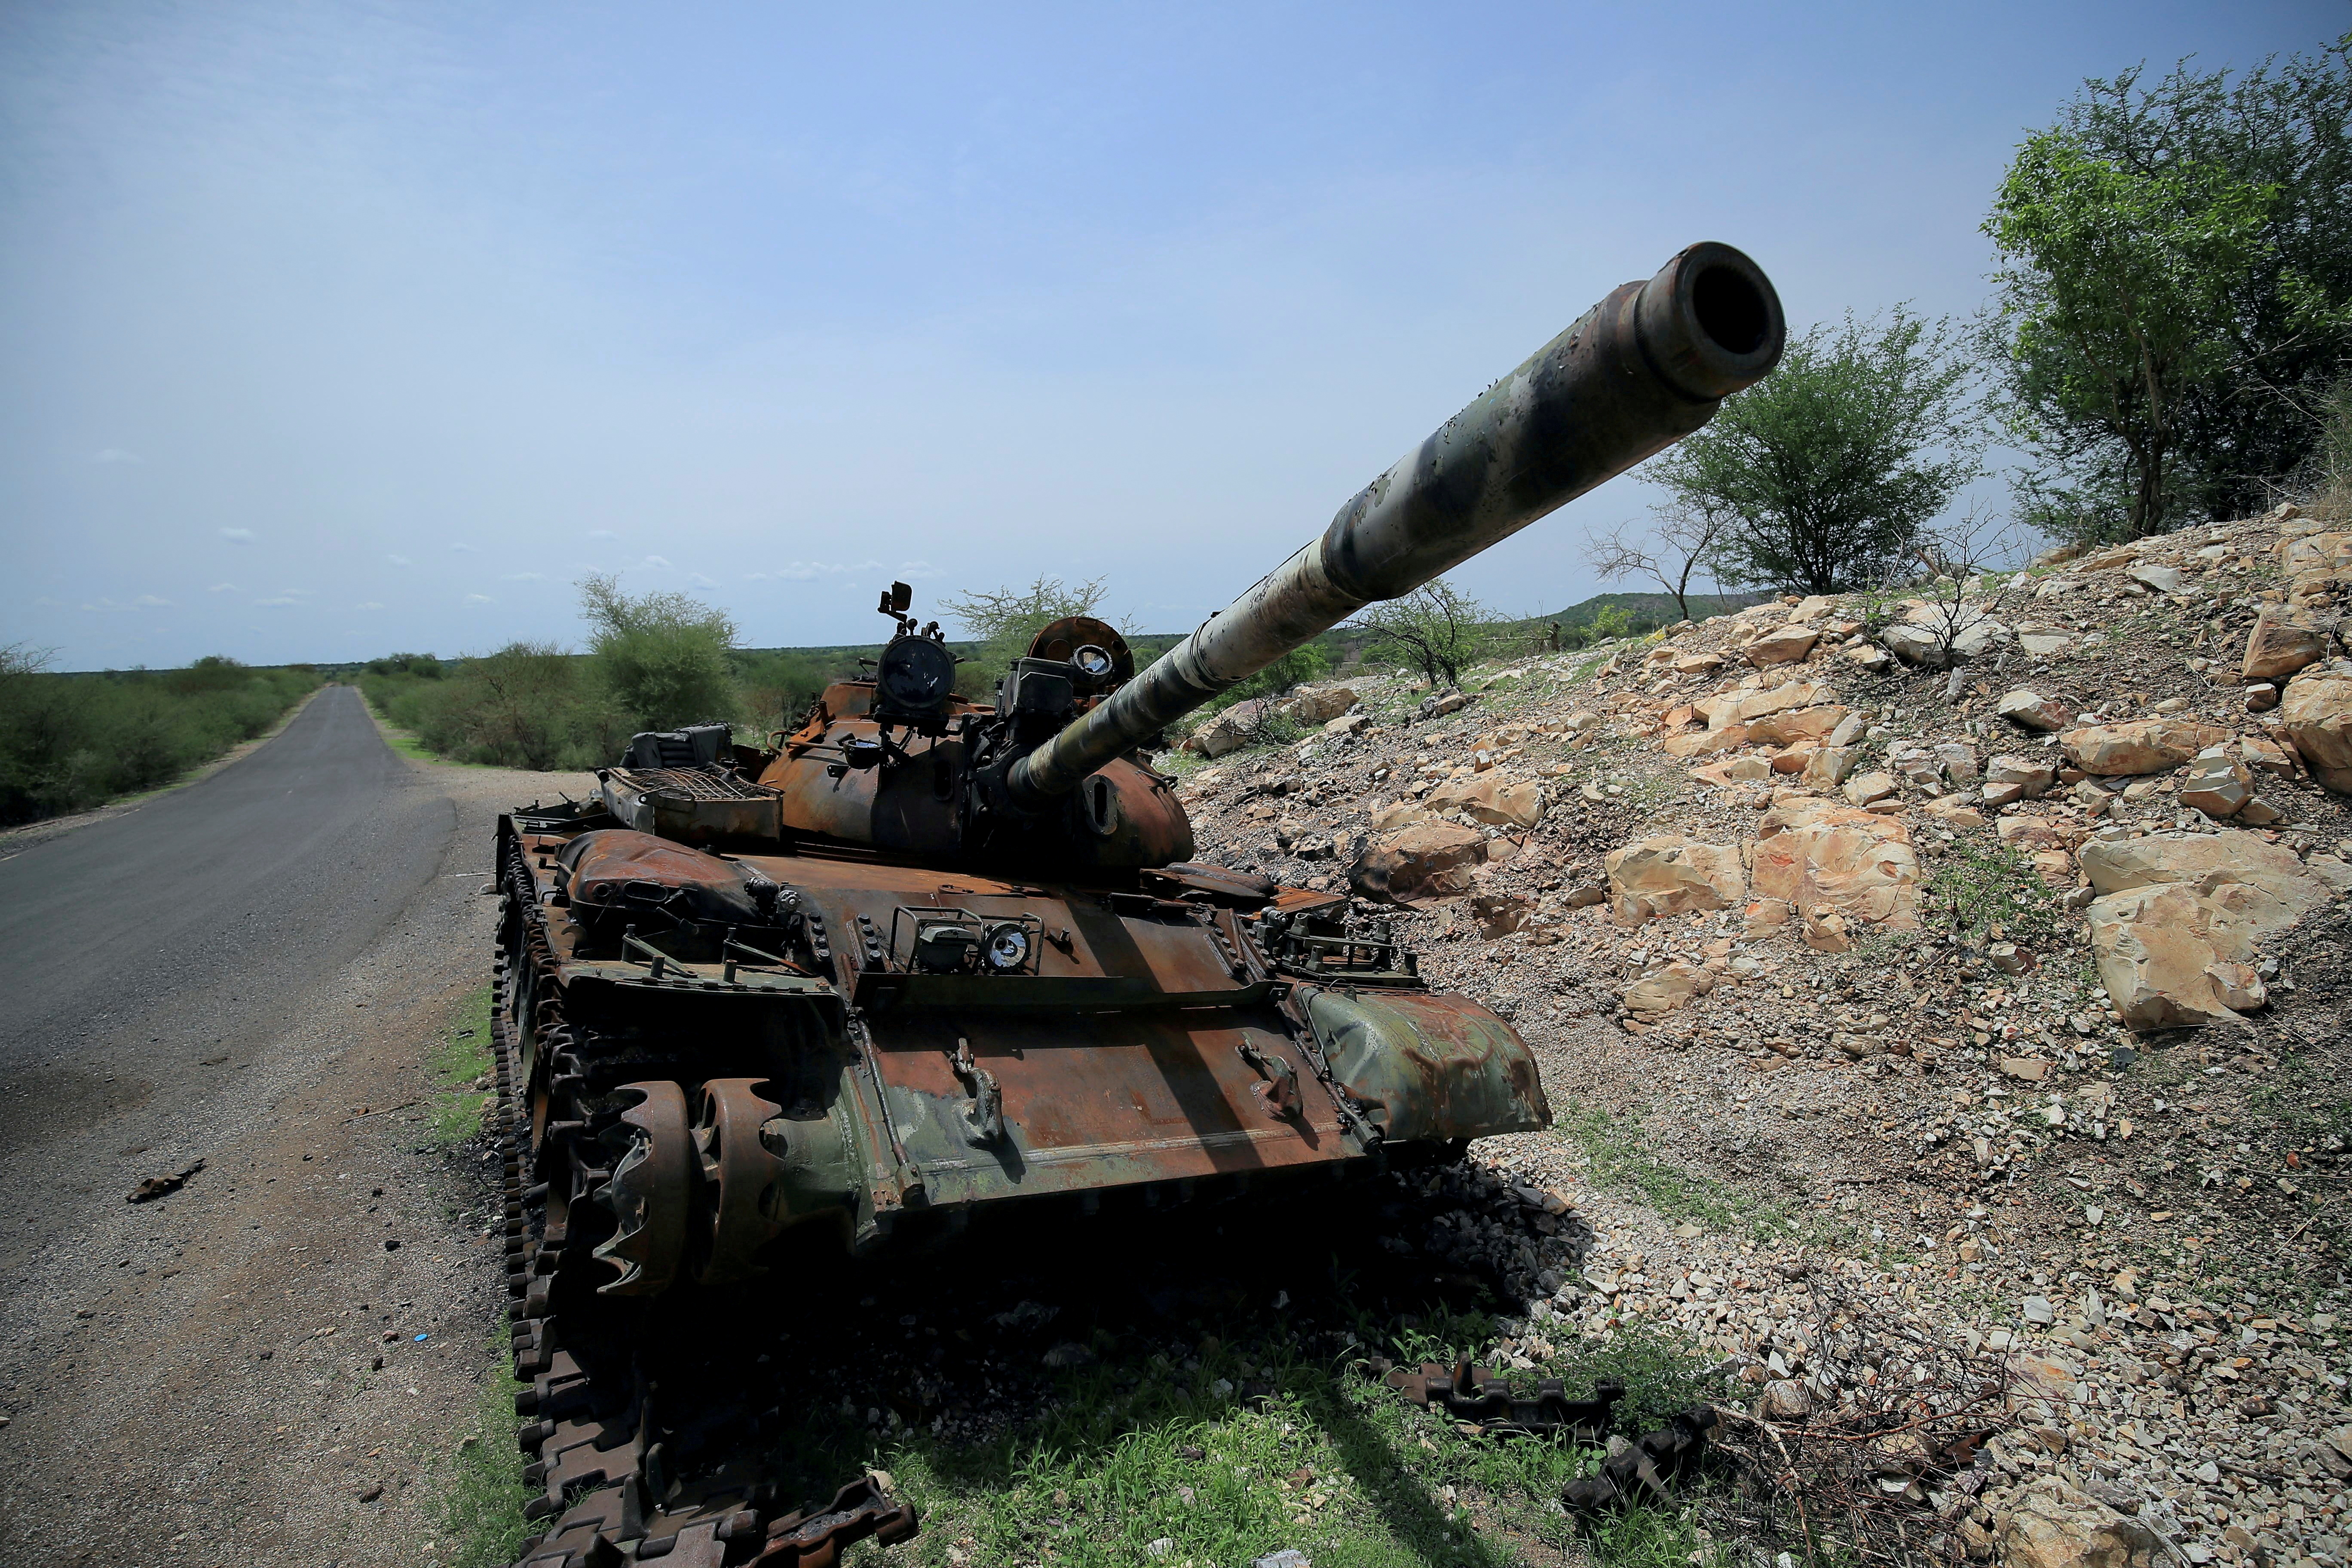 A tank damaged during the fighting between Ethiopia’s National Defense Force (ENDF) and Tigray Special Forces stands on the outskirts of Humera town